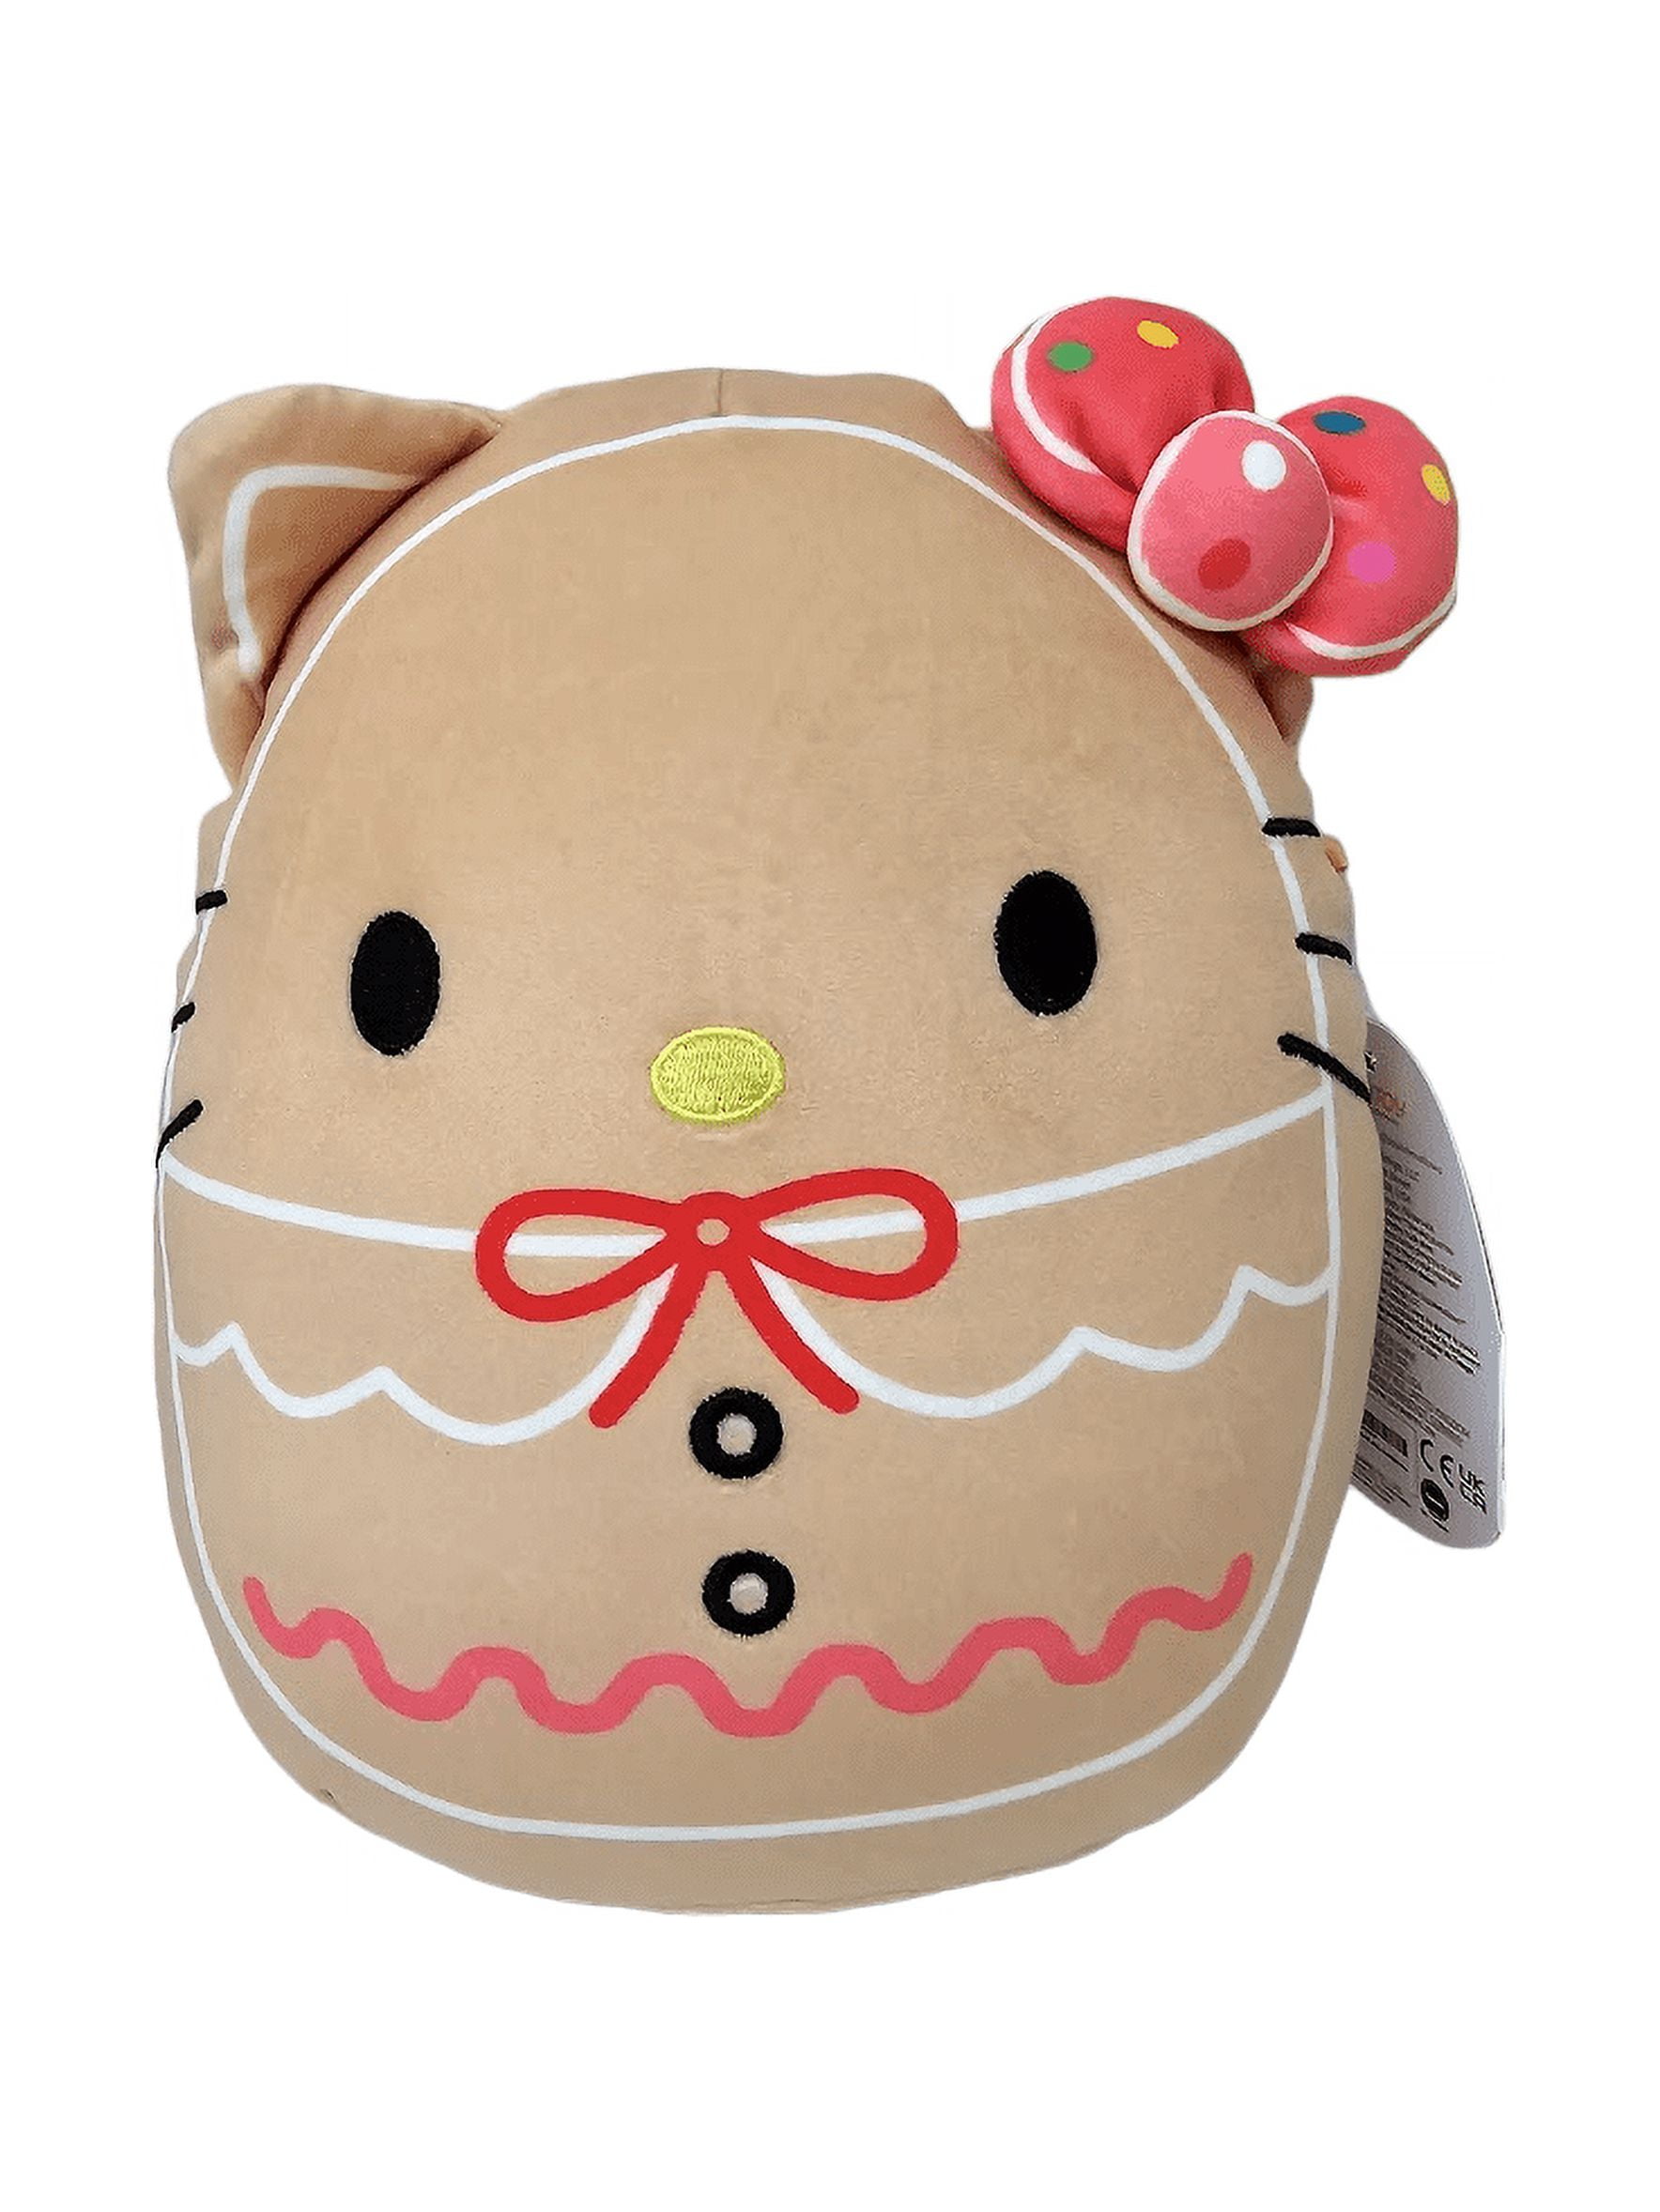 Squishmallows 8 Hello Kitty Gingerbread - Official Kellytoy Christmas  Plush - Collectible Soft & Squishy Hello Kitty Stuffed Animal Toy - Gift  for